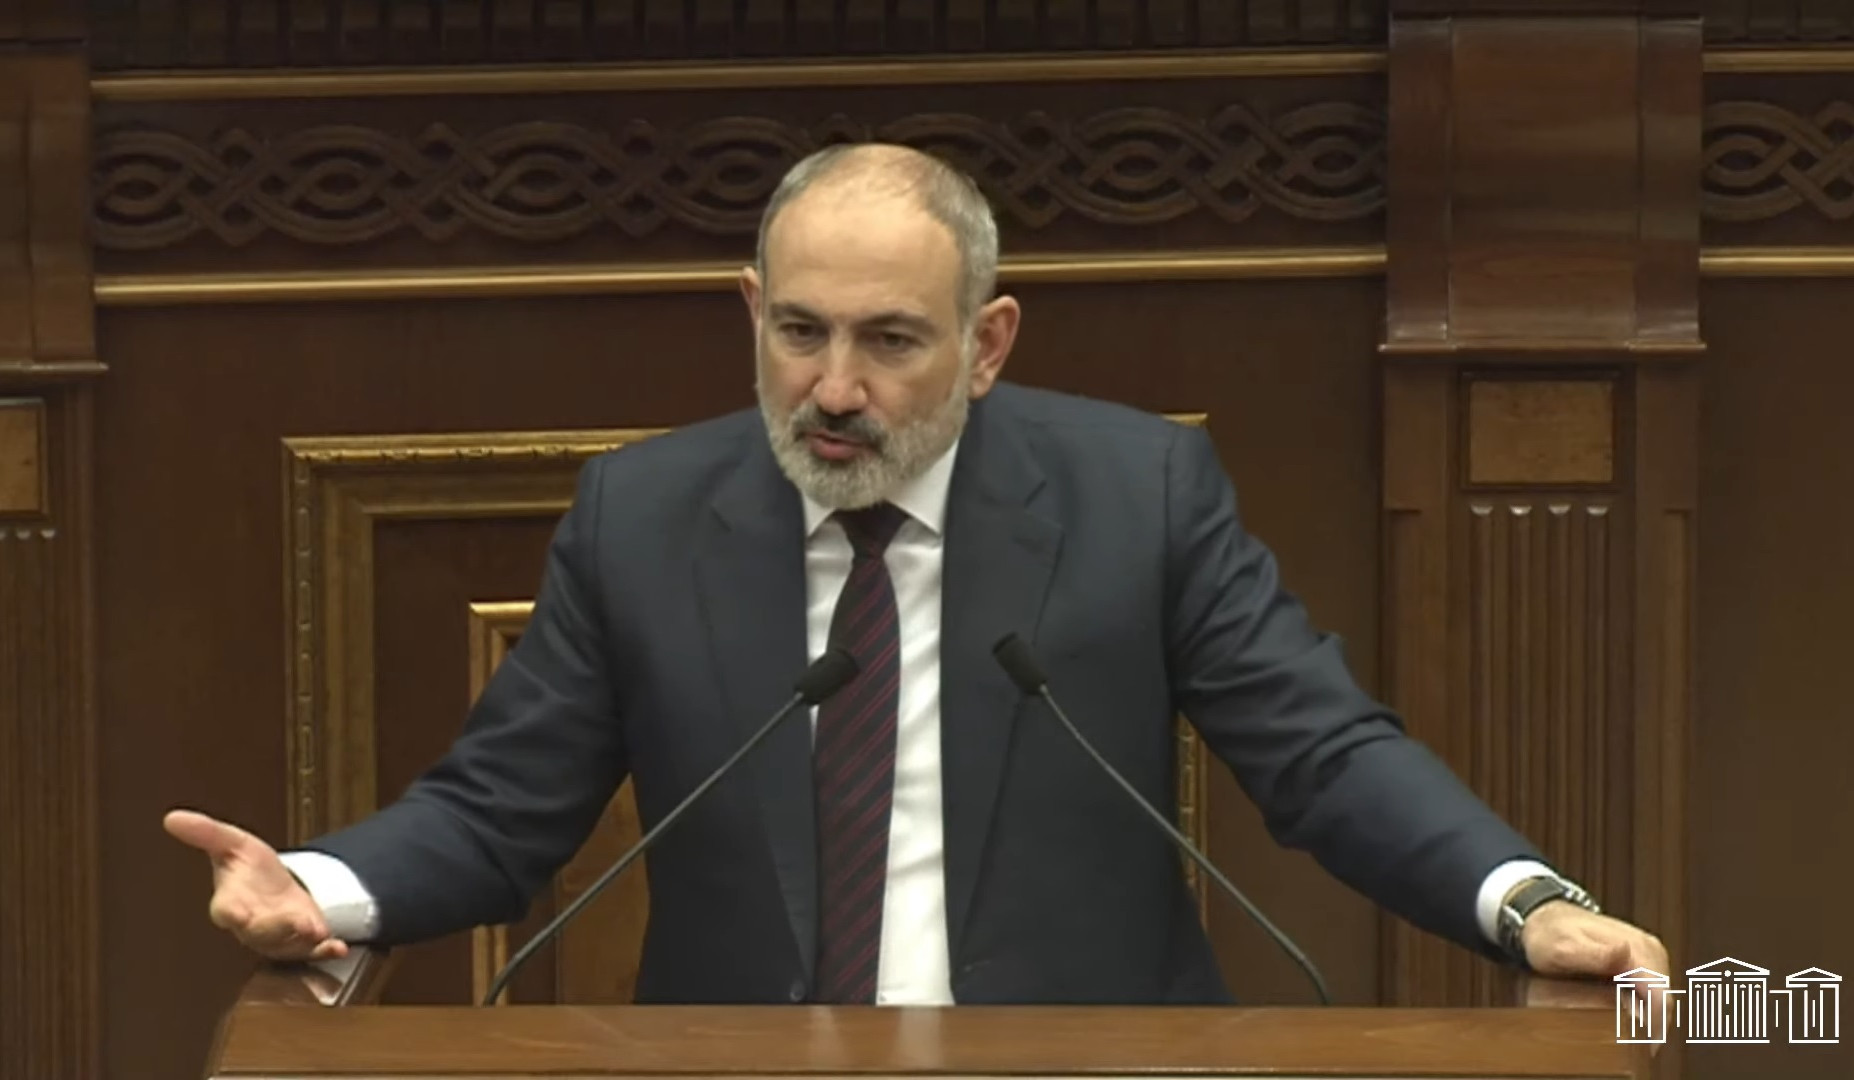 As of now, there is no agreement between Armenia and Azerbaijan over maps: Pashinyan